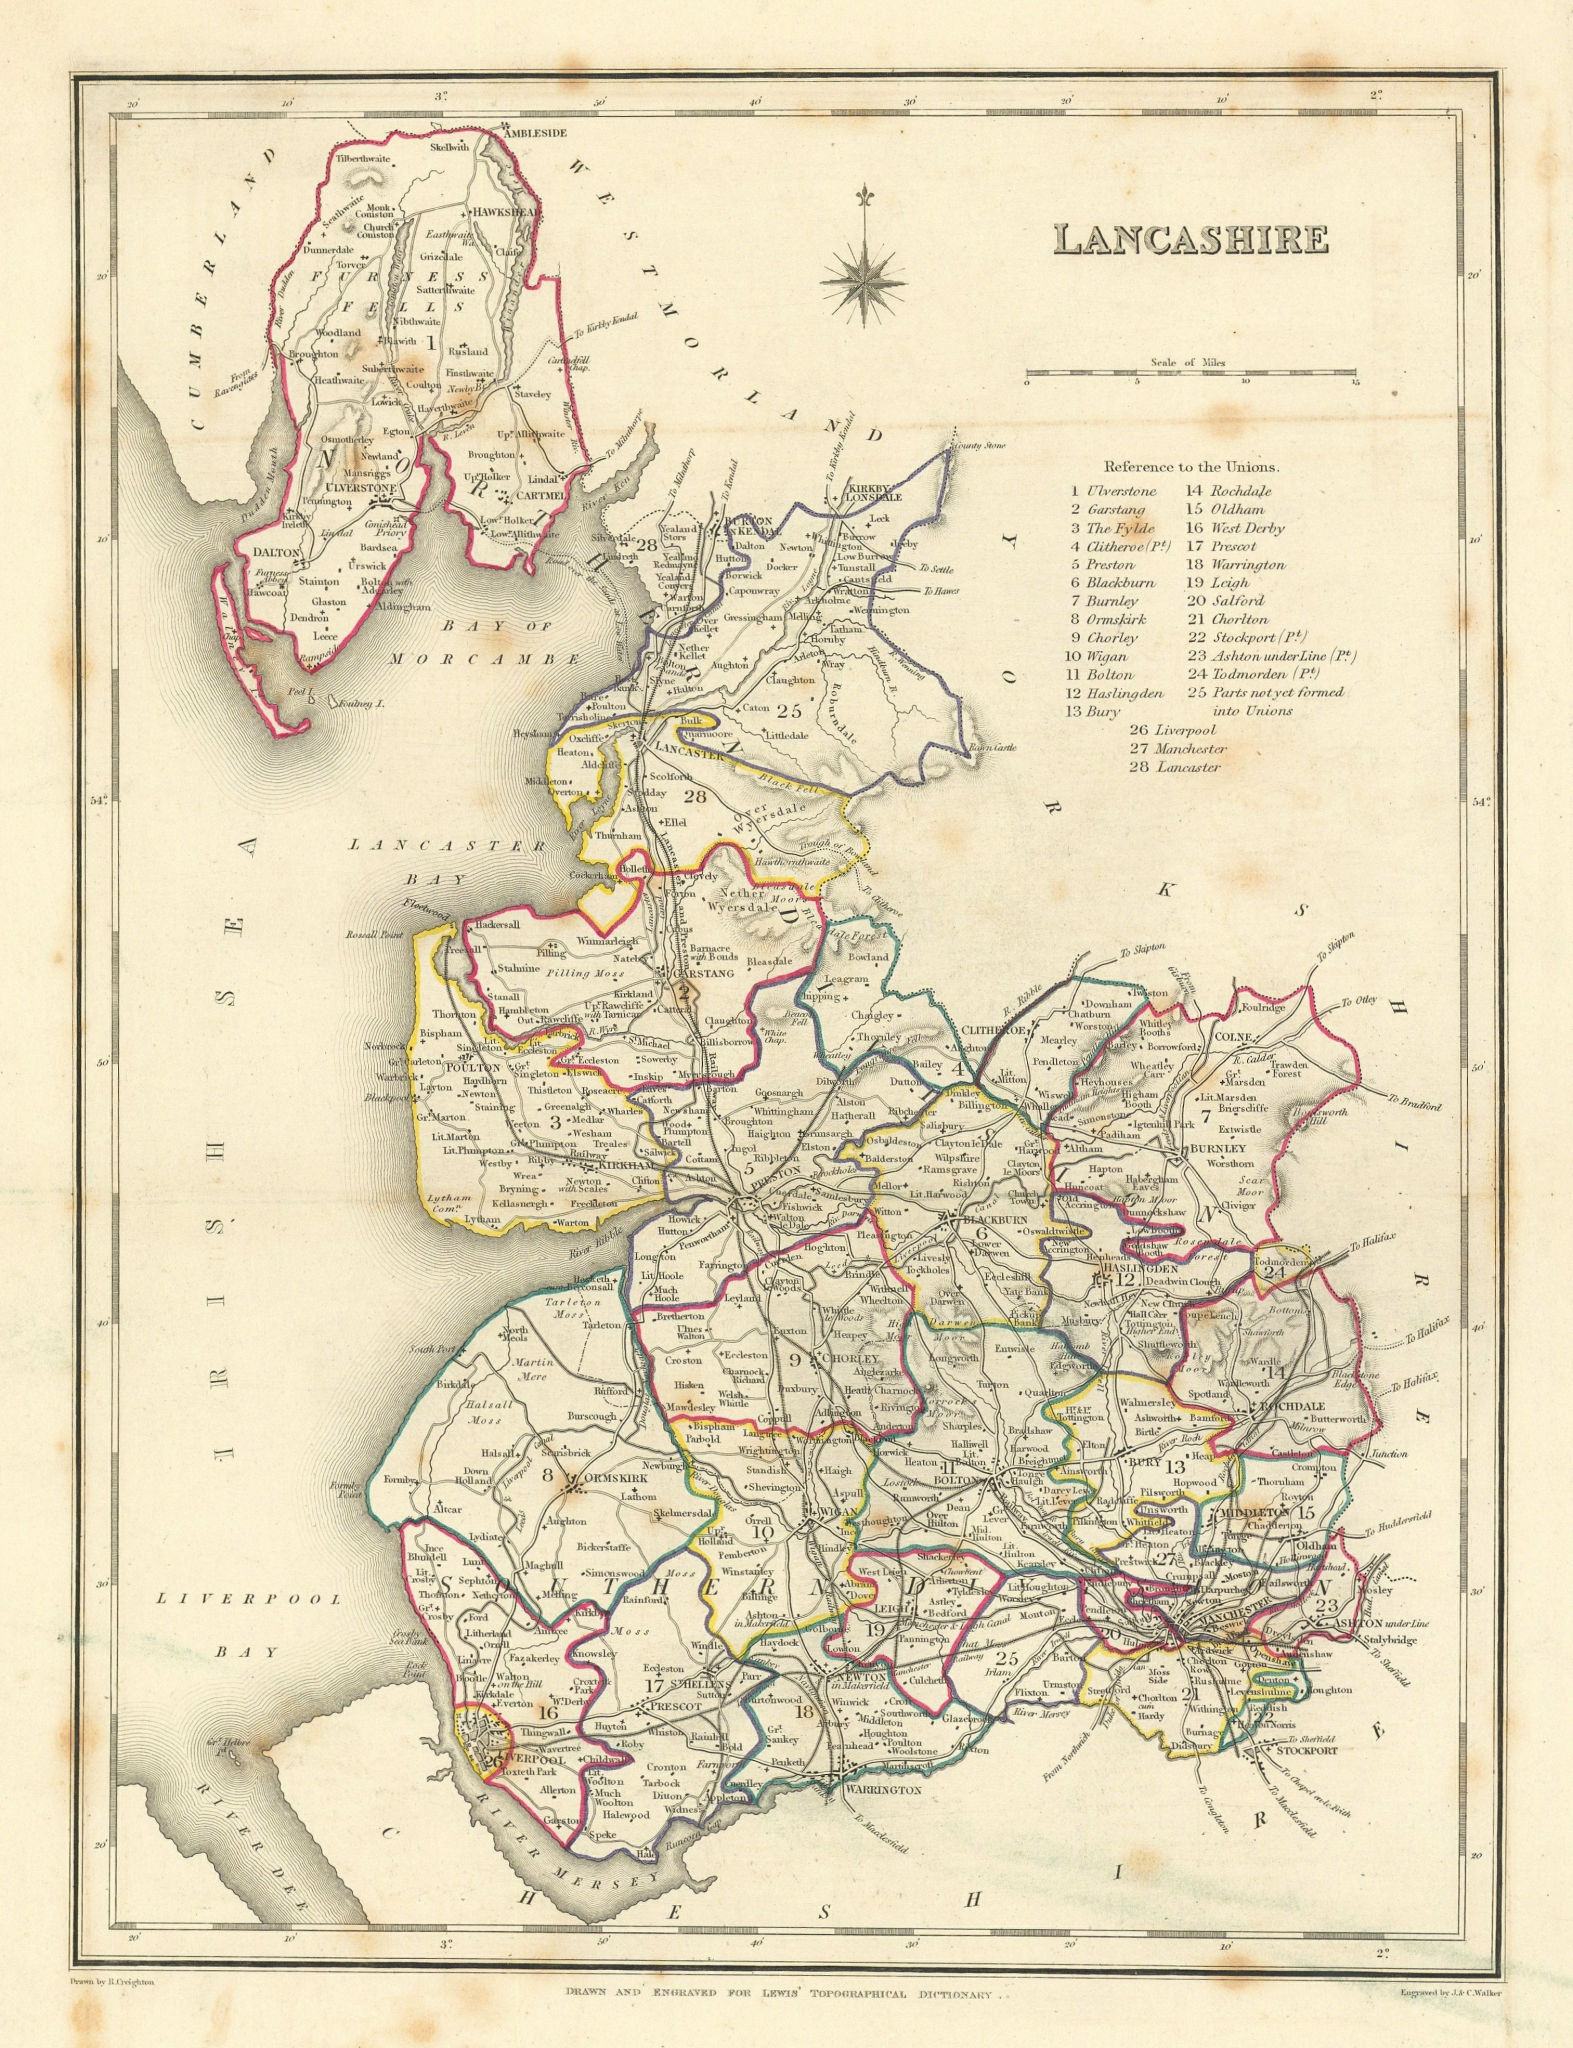 Associate Product Antique county map of LANCASHIRE by Creighton & Walker for Lewis c1840 old